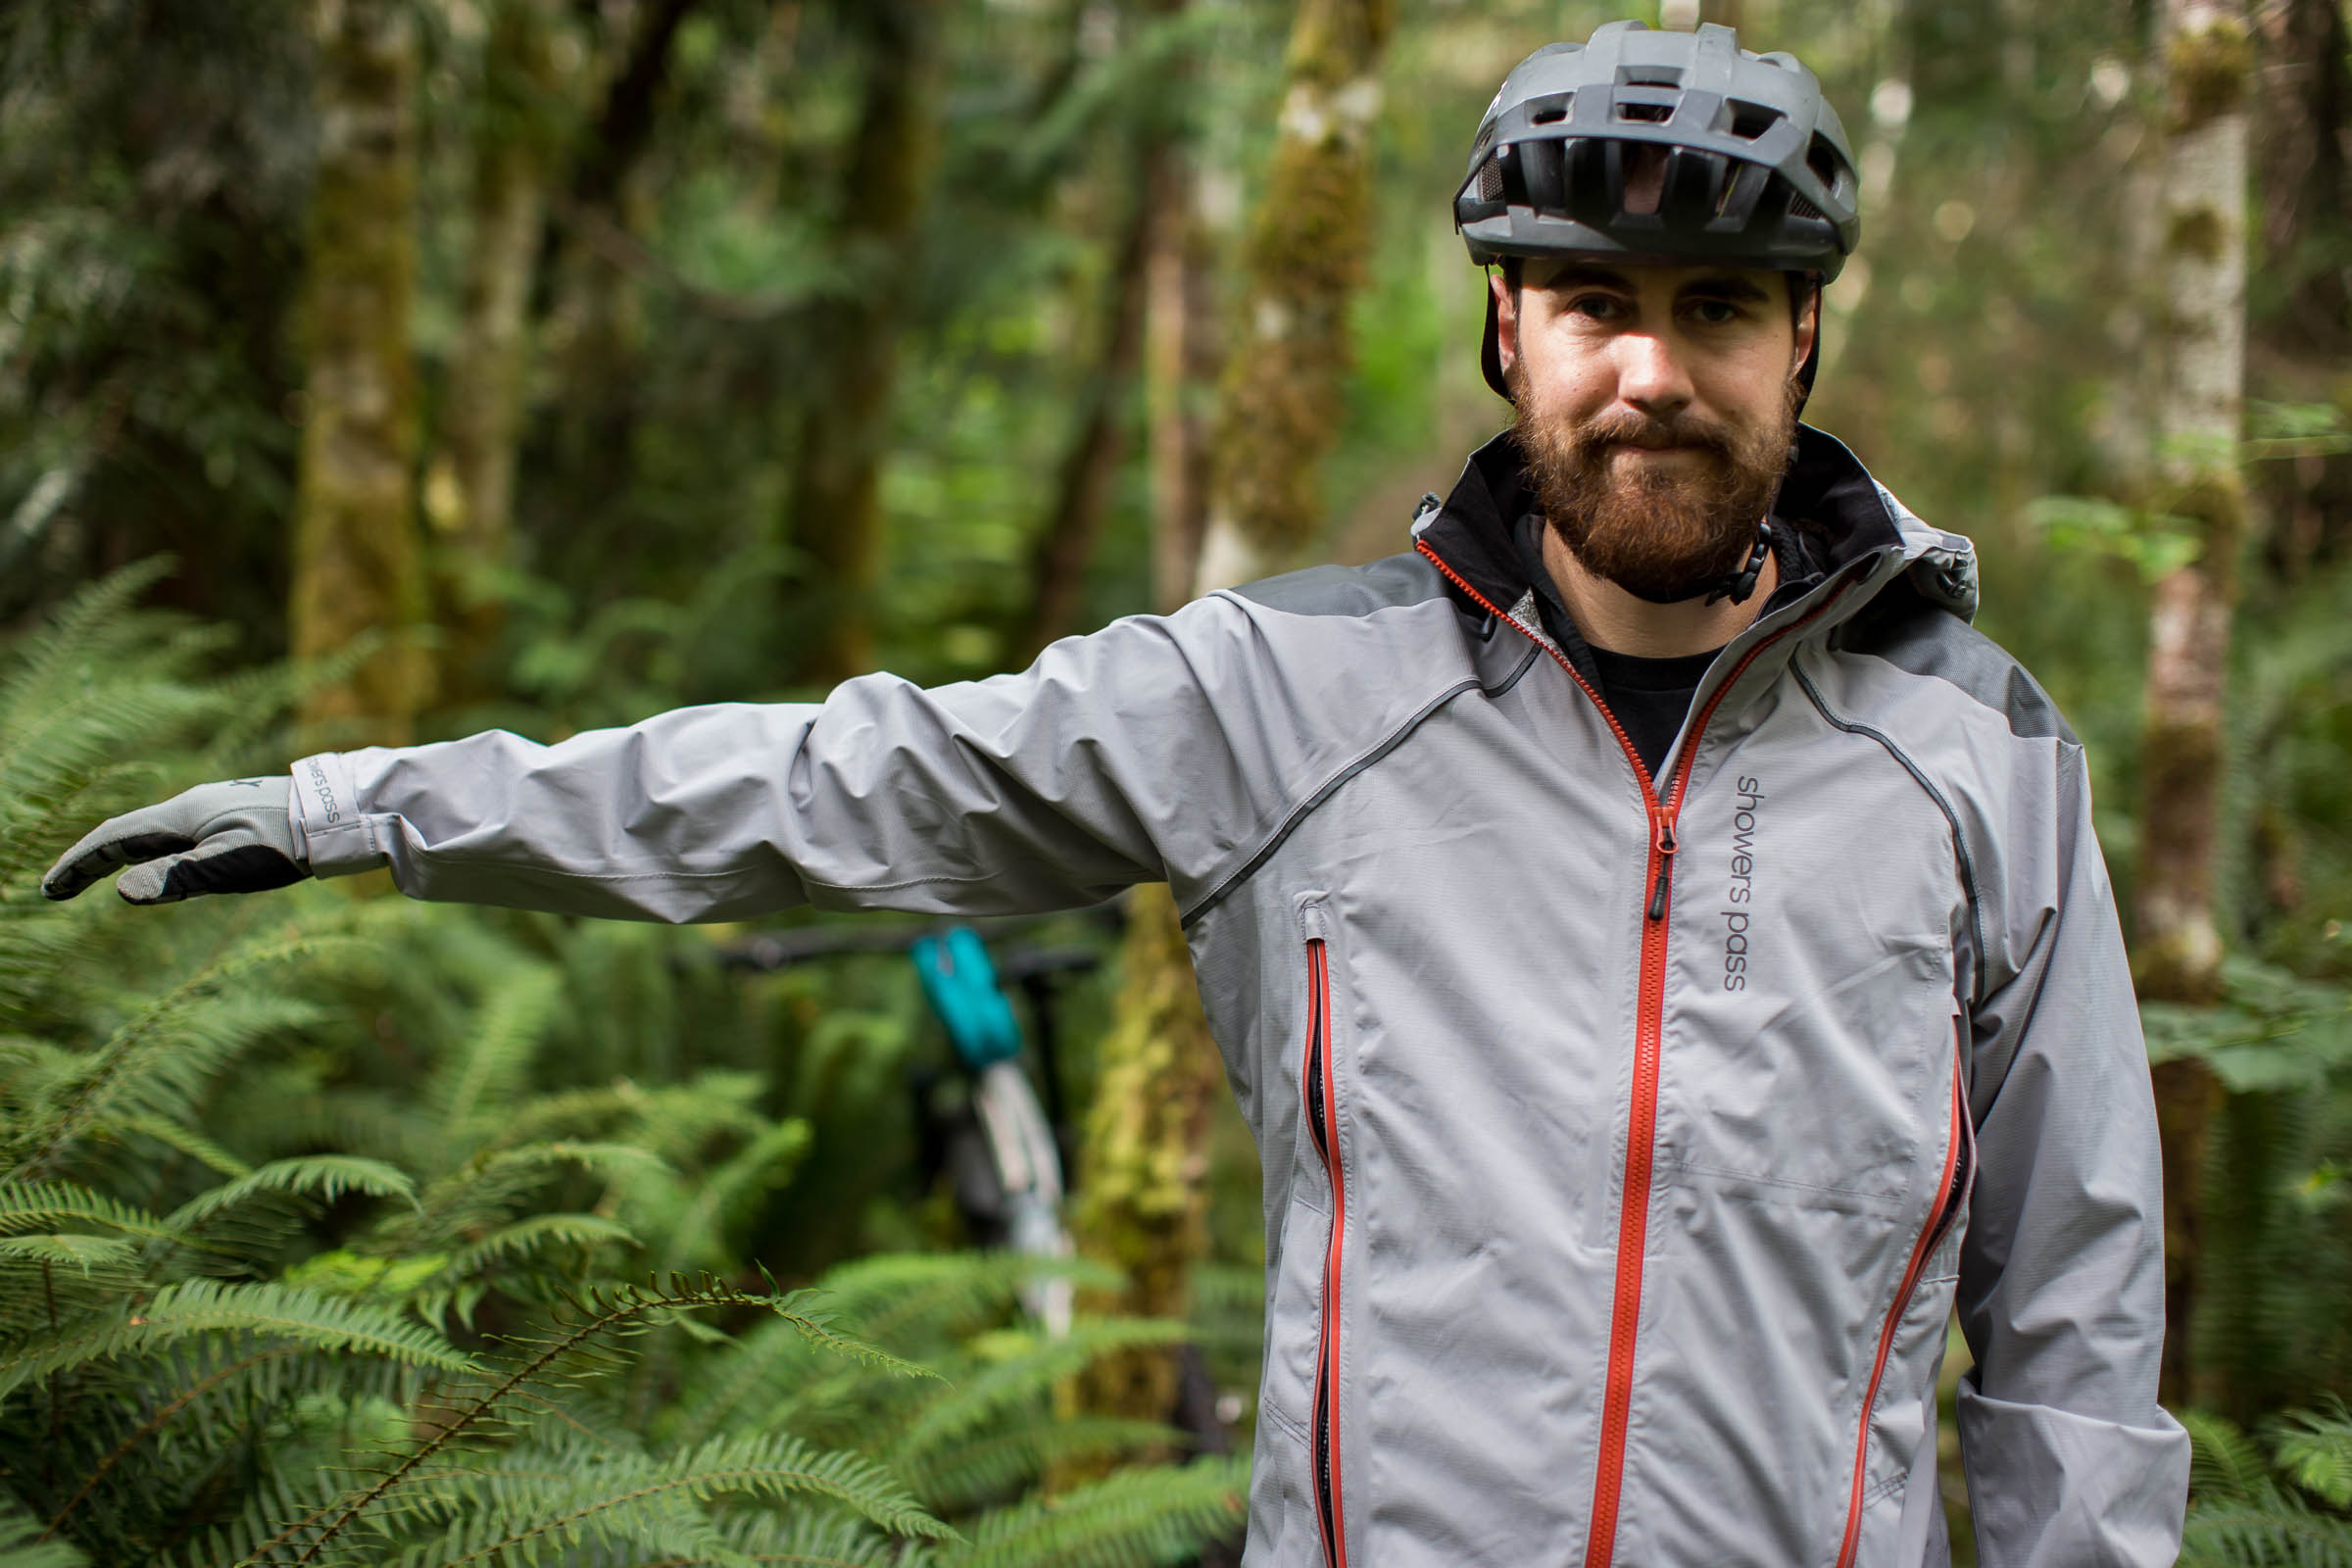 Showers Pass Transit Jacket CC Review (men's and women's) - Road